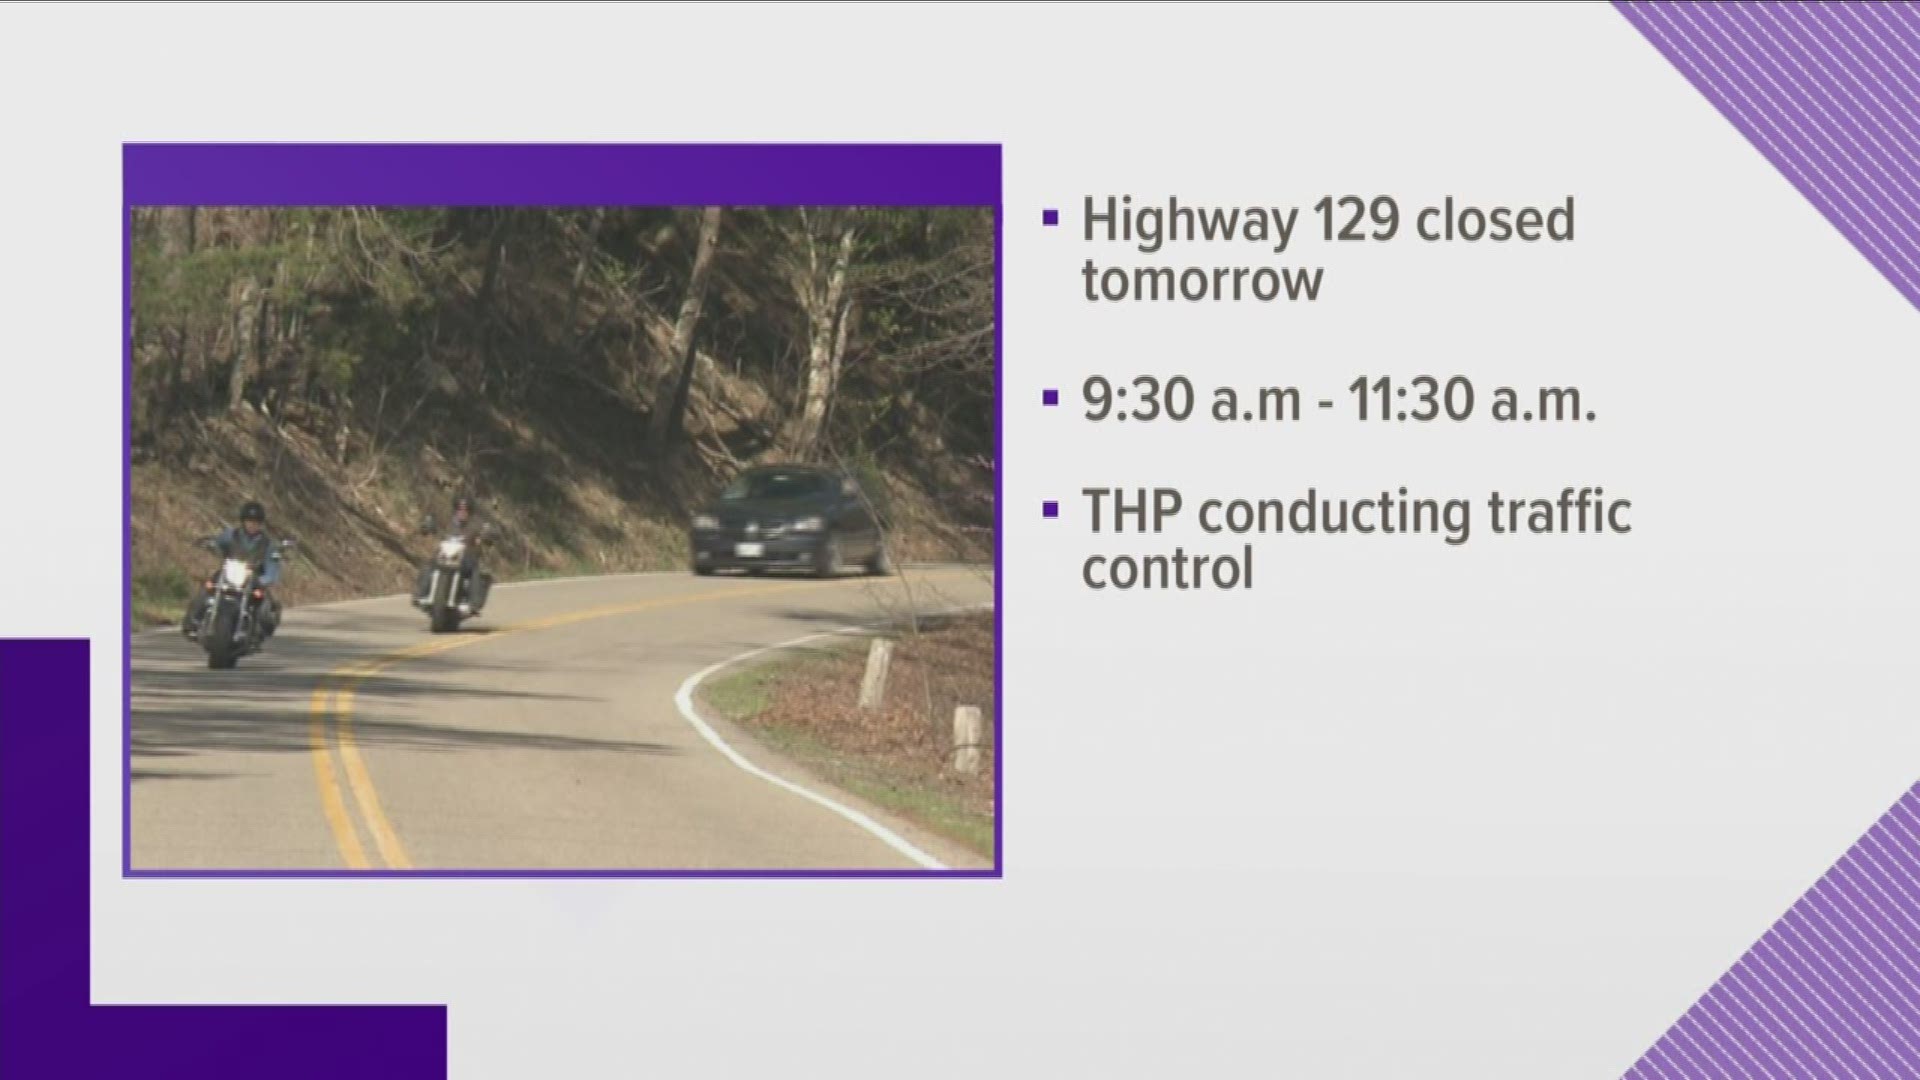 THP handling closures 9:30 a.m.-11:30 a.m. Sunday.